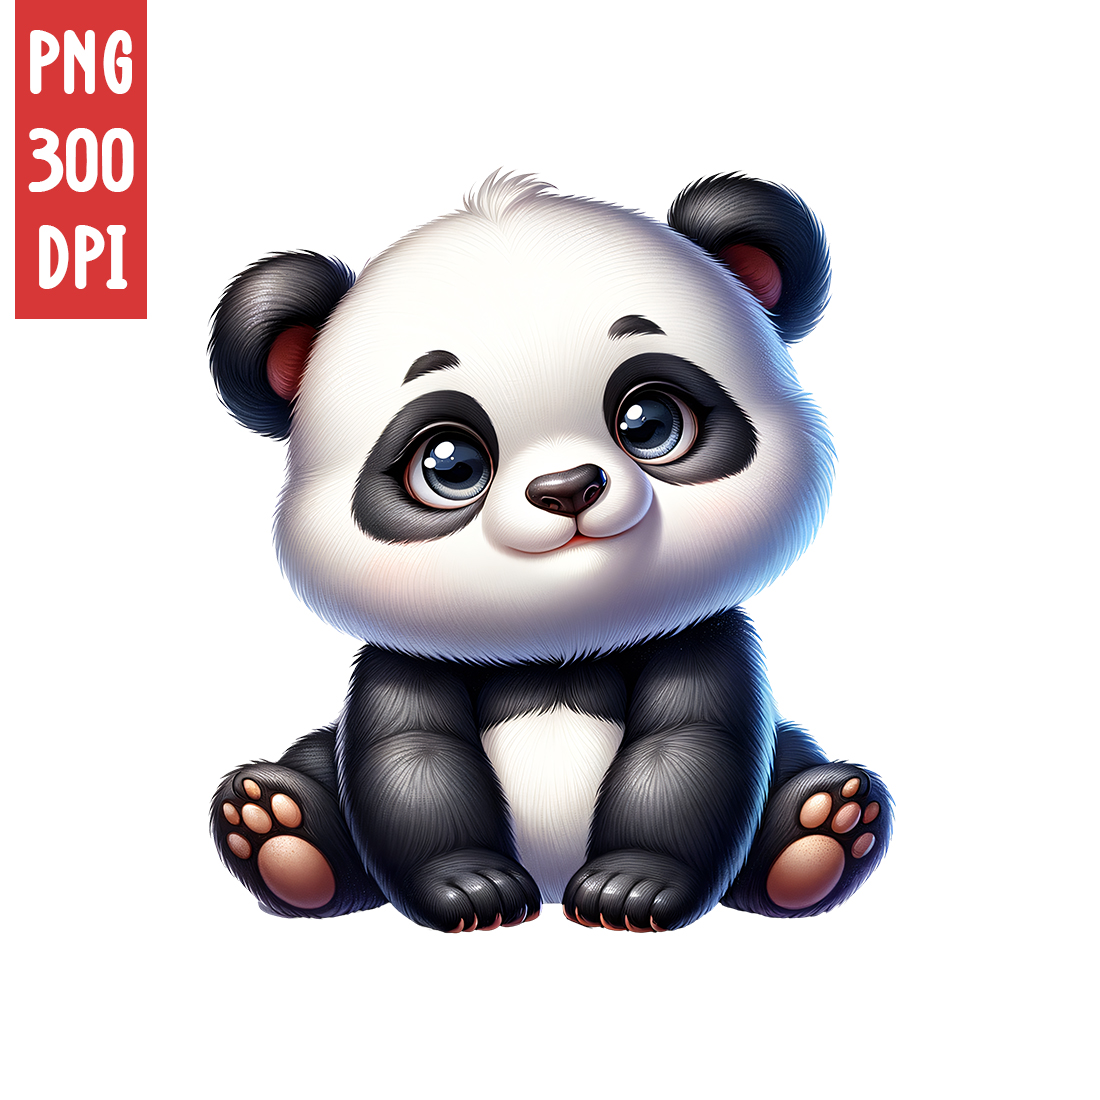 Cute Panda Clipart | Animals Clipart | PNG cover image.